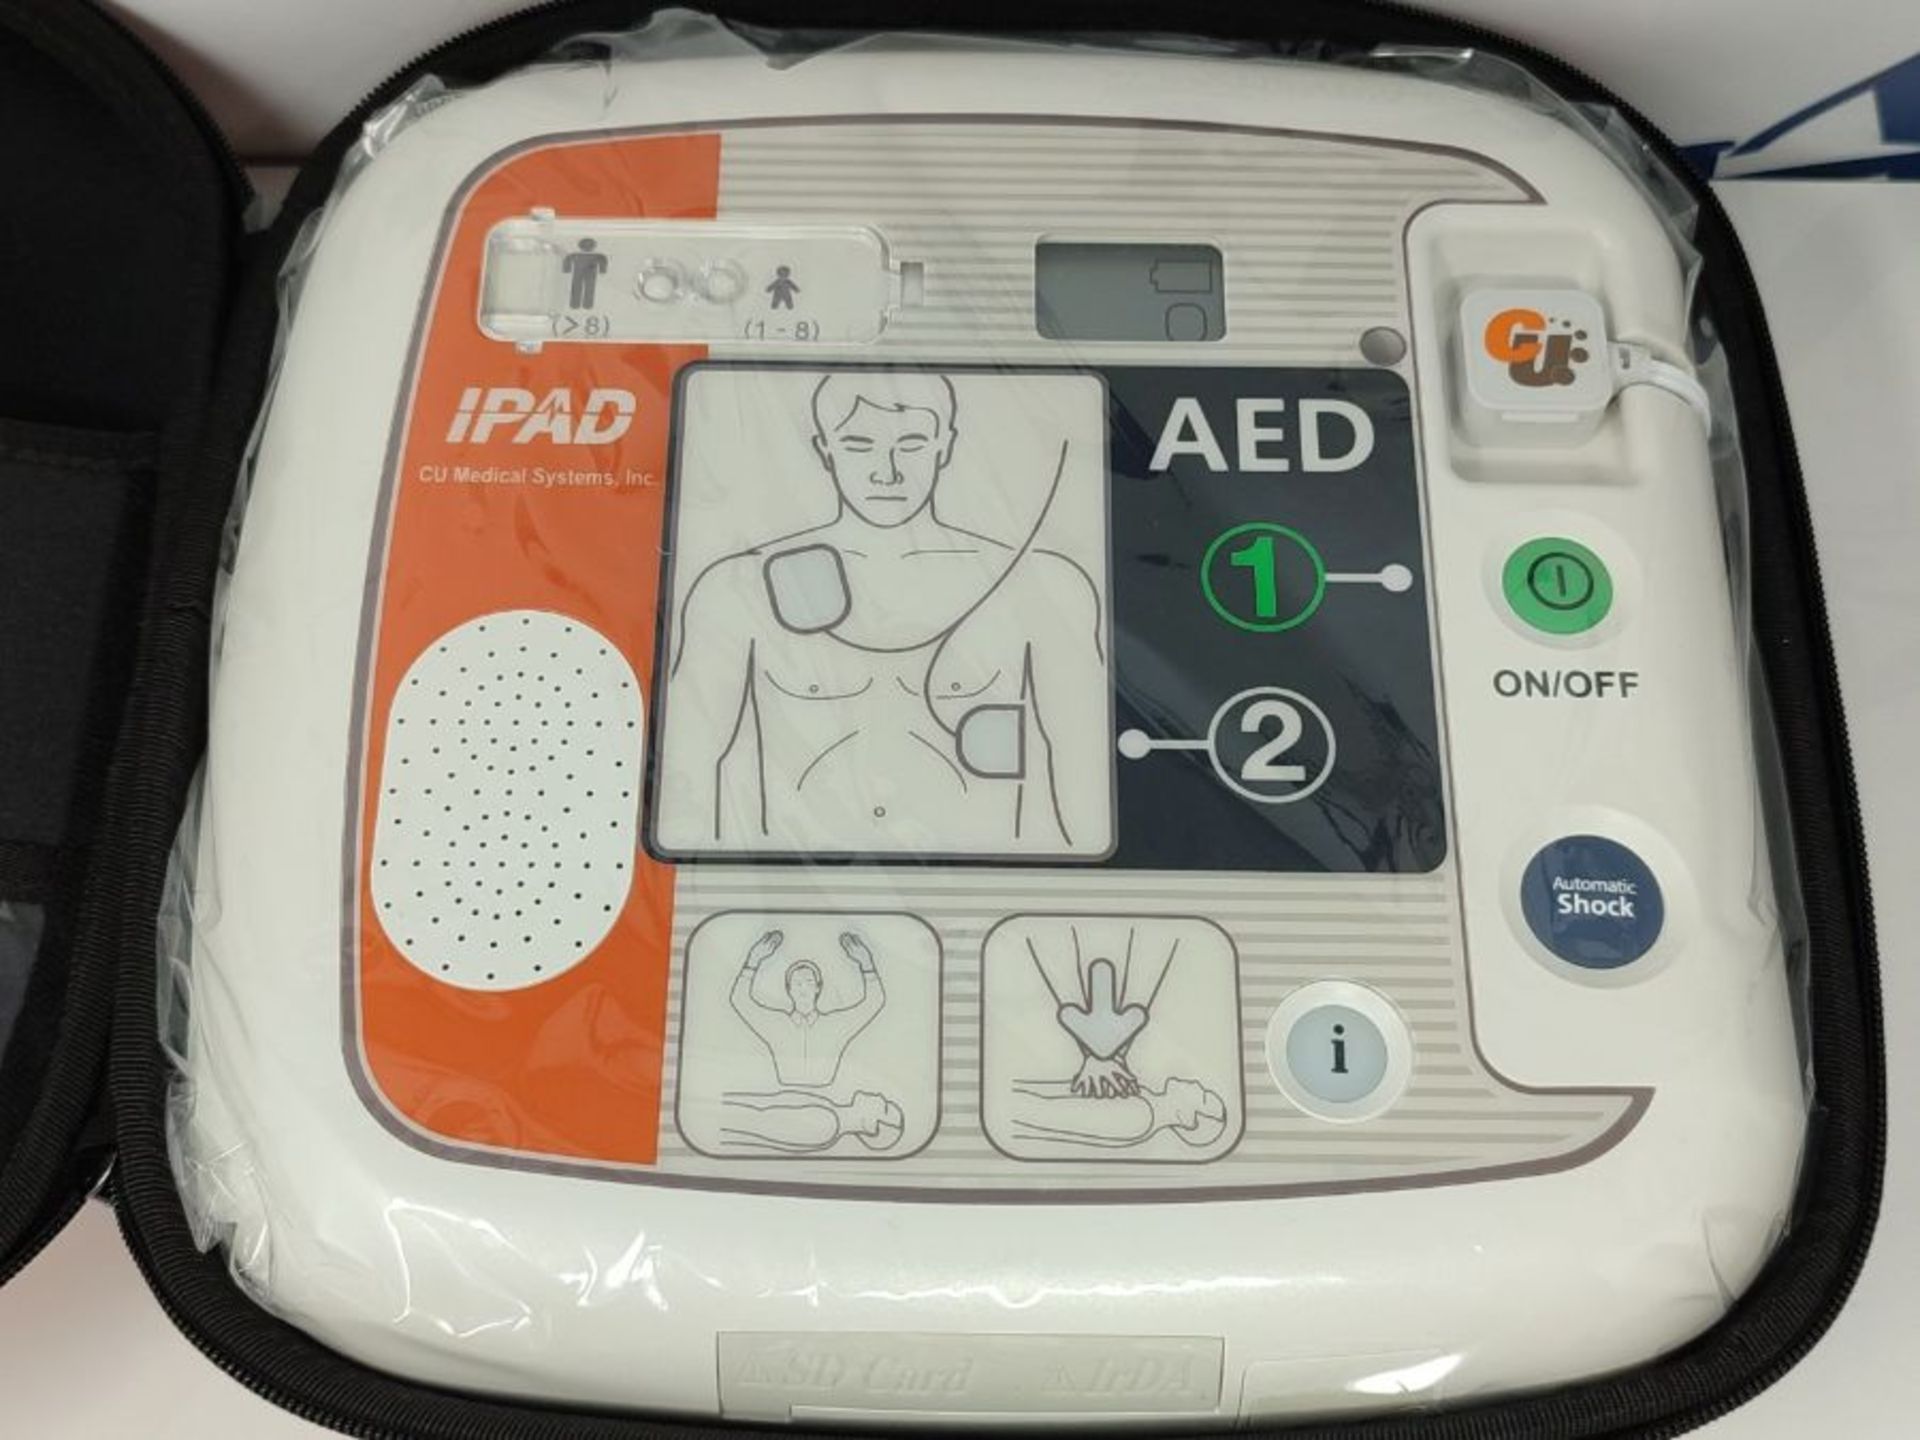 RRP £1206.00 iPAD SP1 AED Fully Automatic Defibrillator - Image 3 of 3